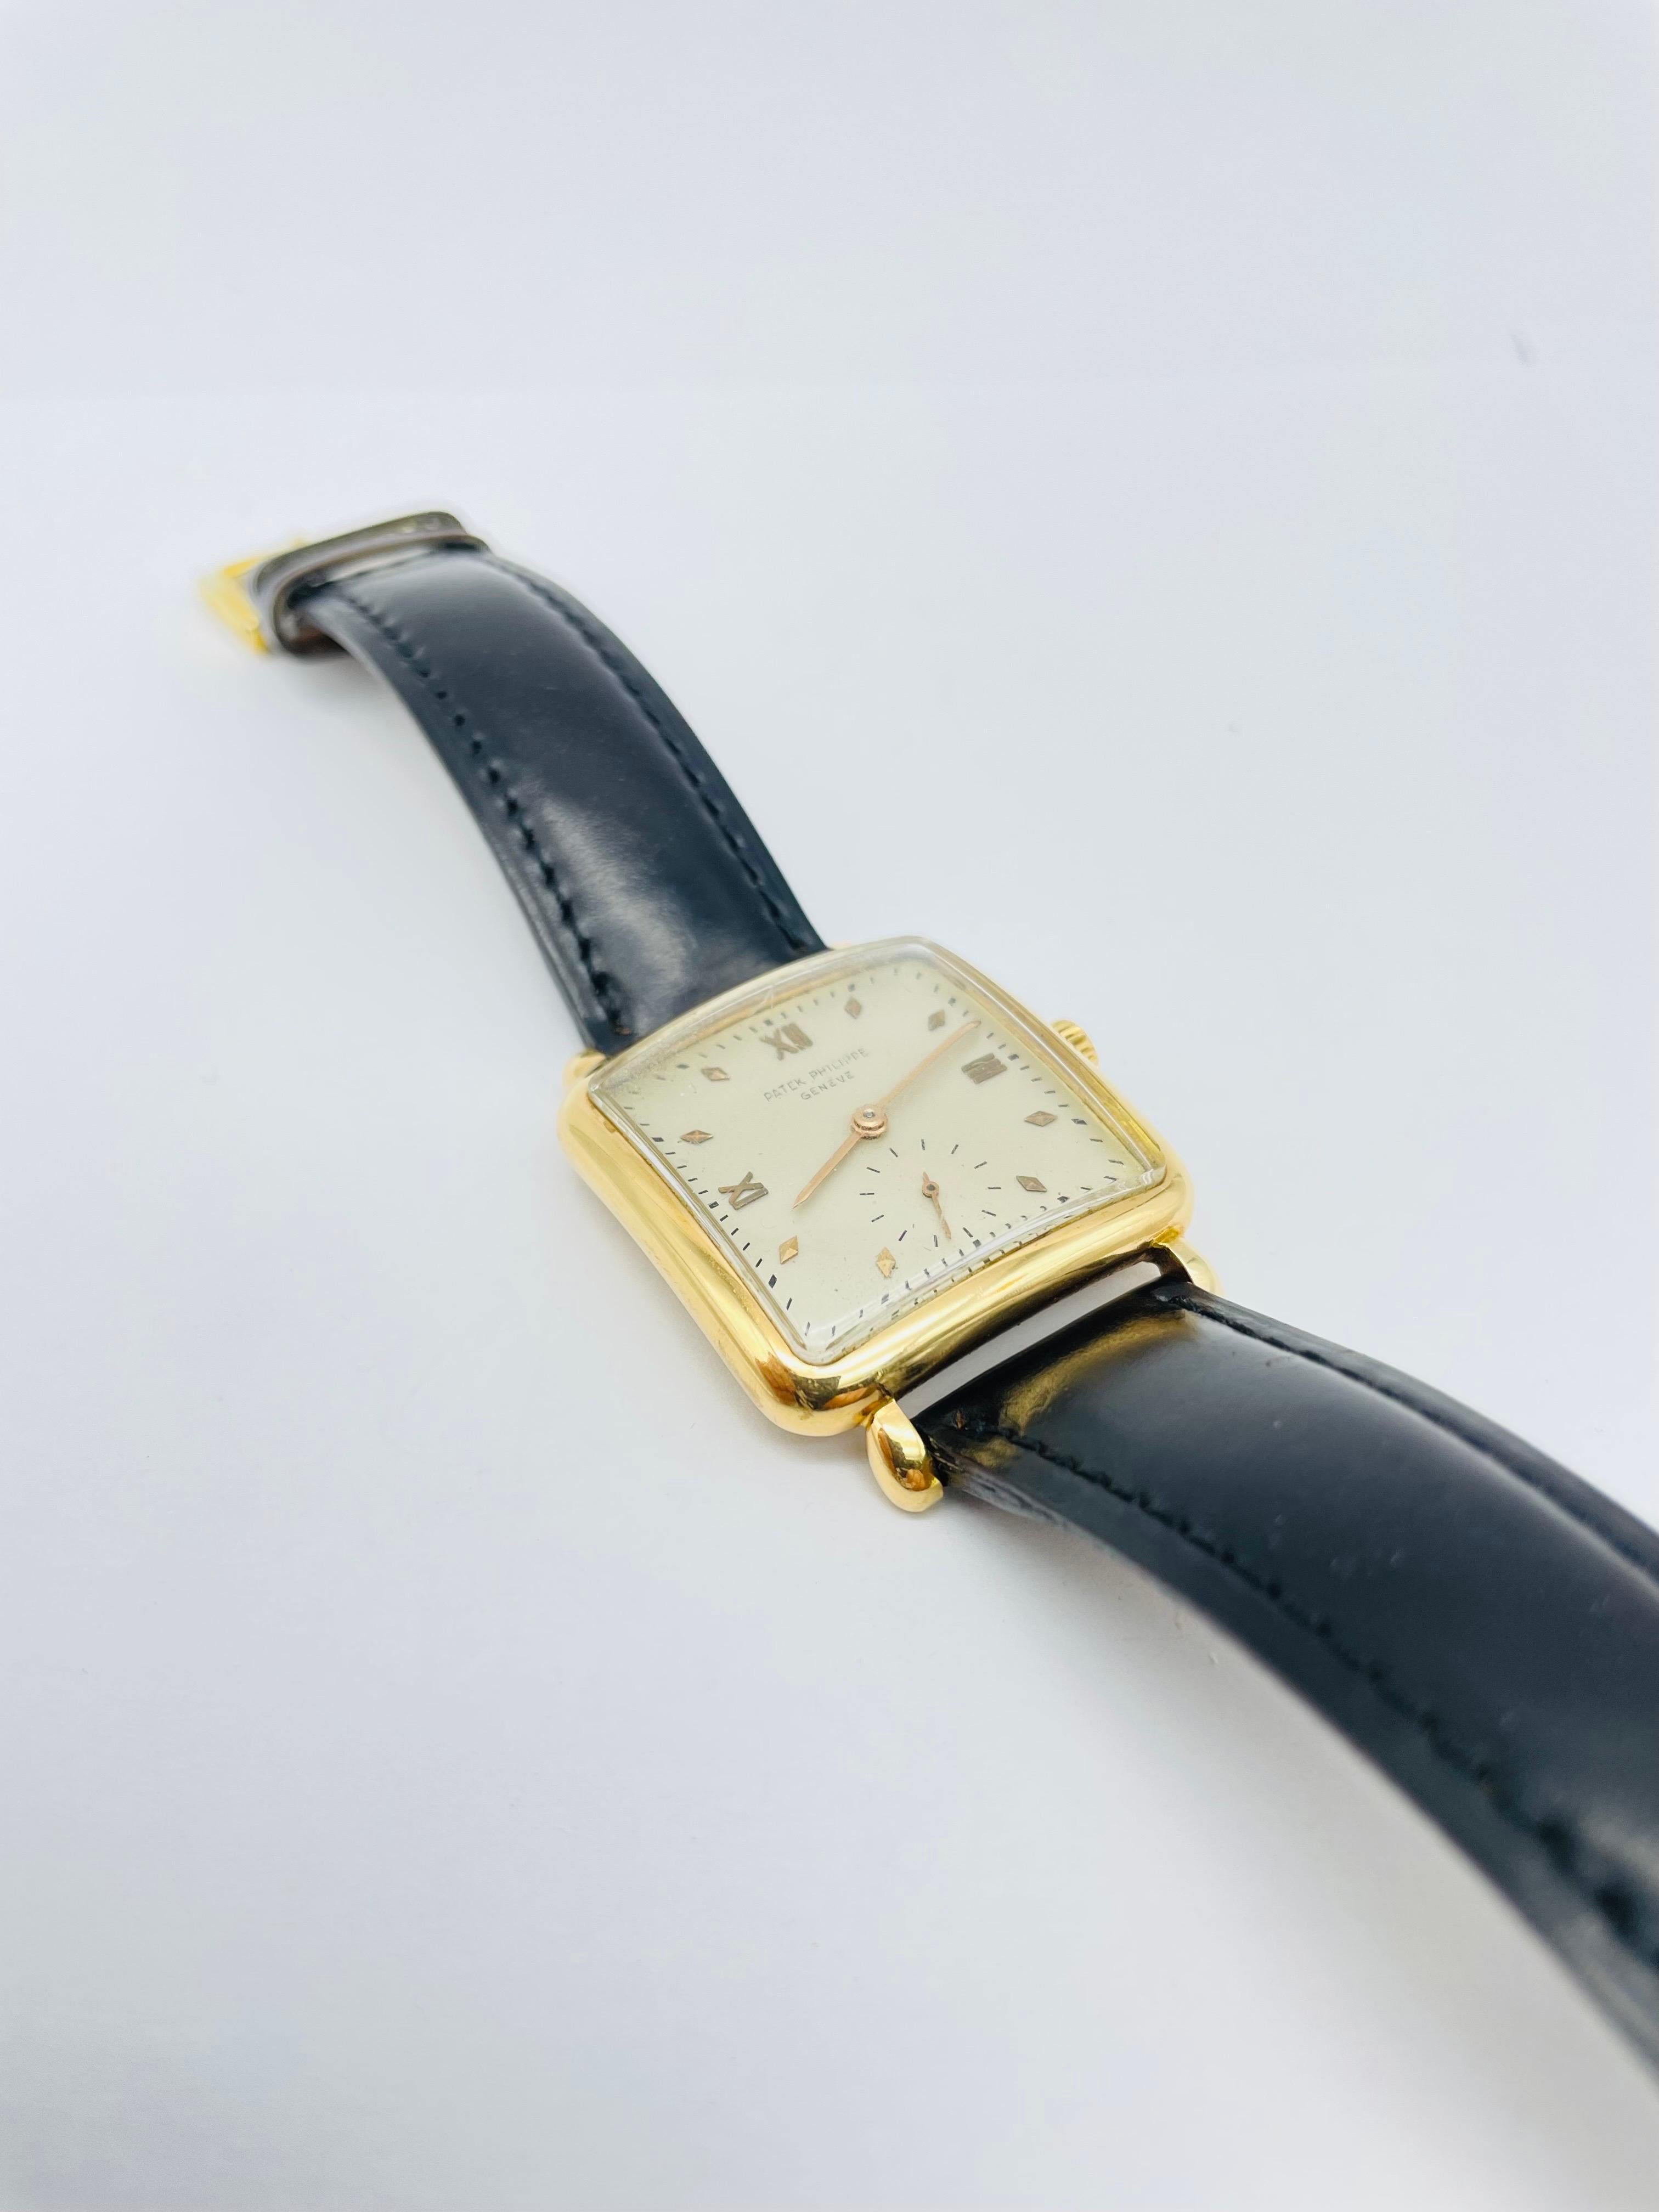 Behold the majesty of the Patek Philippe Rectangular Cushion 18K Yellow Gold 1950s Mechanical Men's Watch Ref. 2492, a masterpiece of horological engineering that showcases the finest craftsmanship and design elements that Patek Philippe is renowned